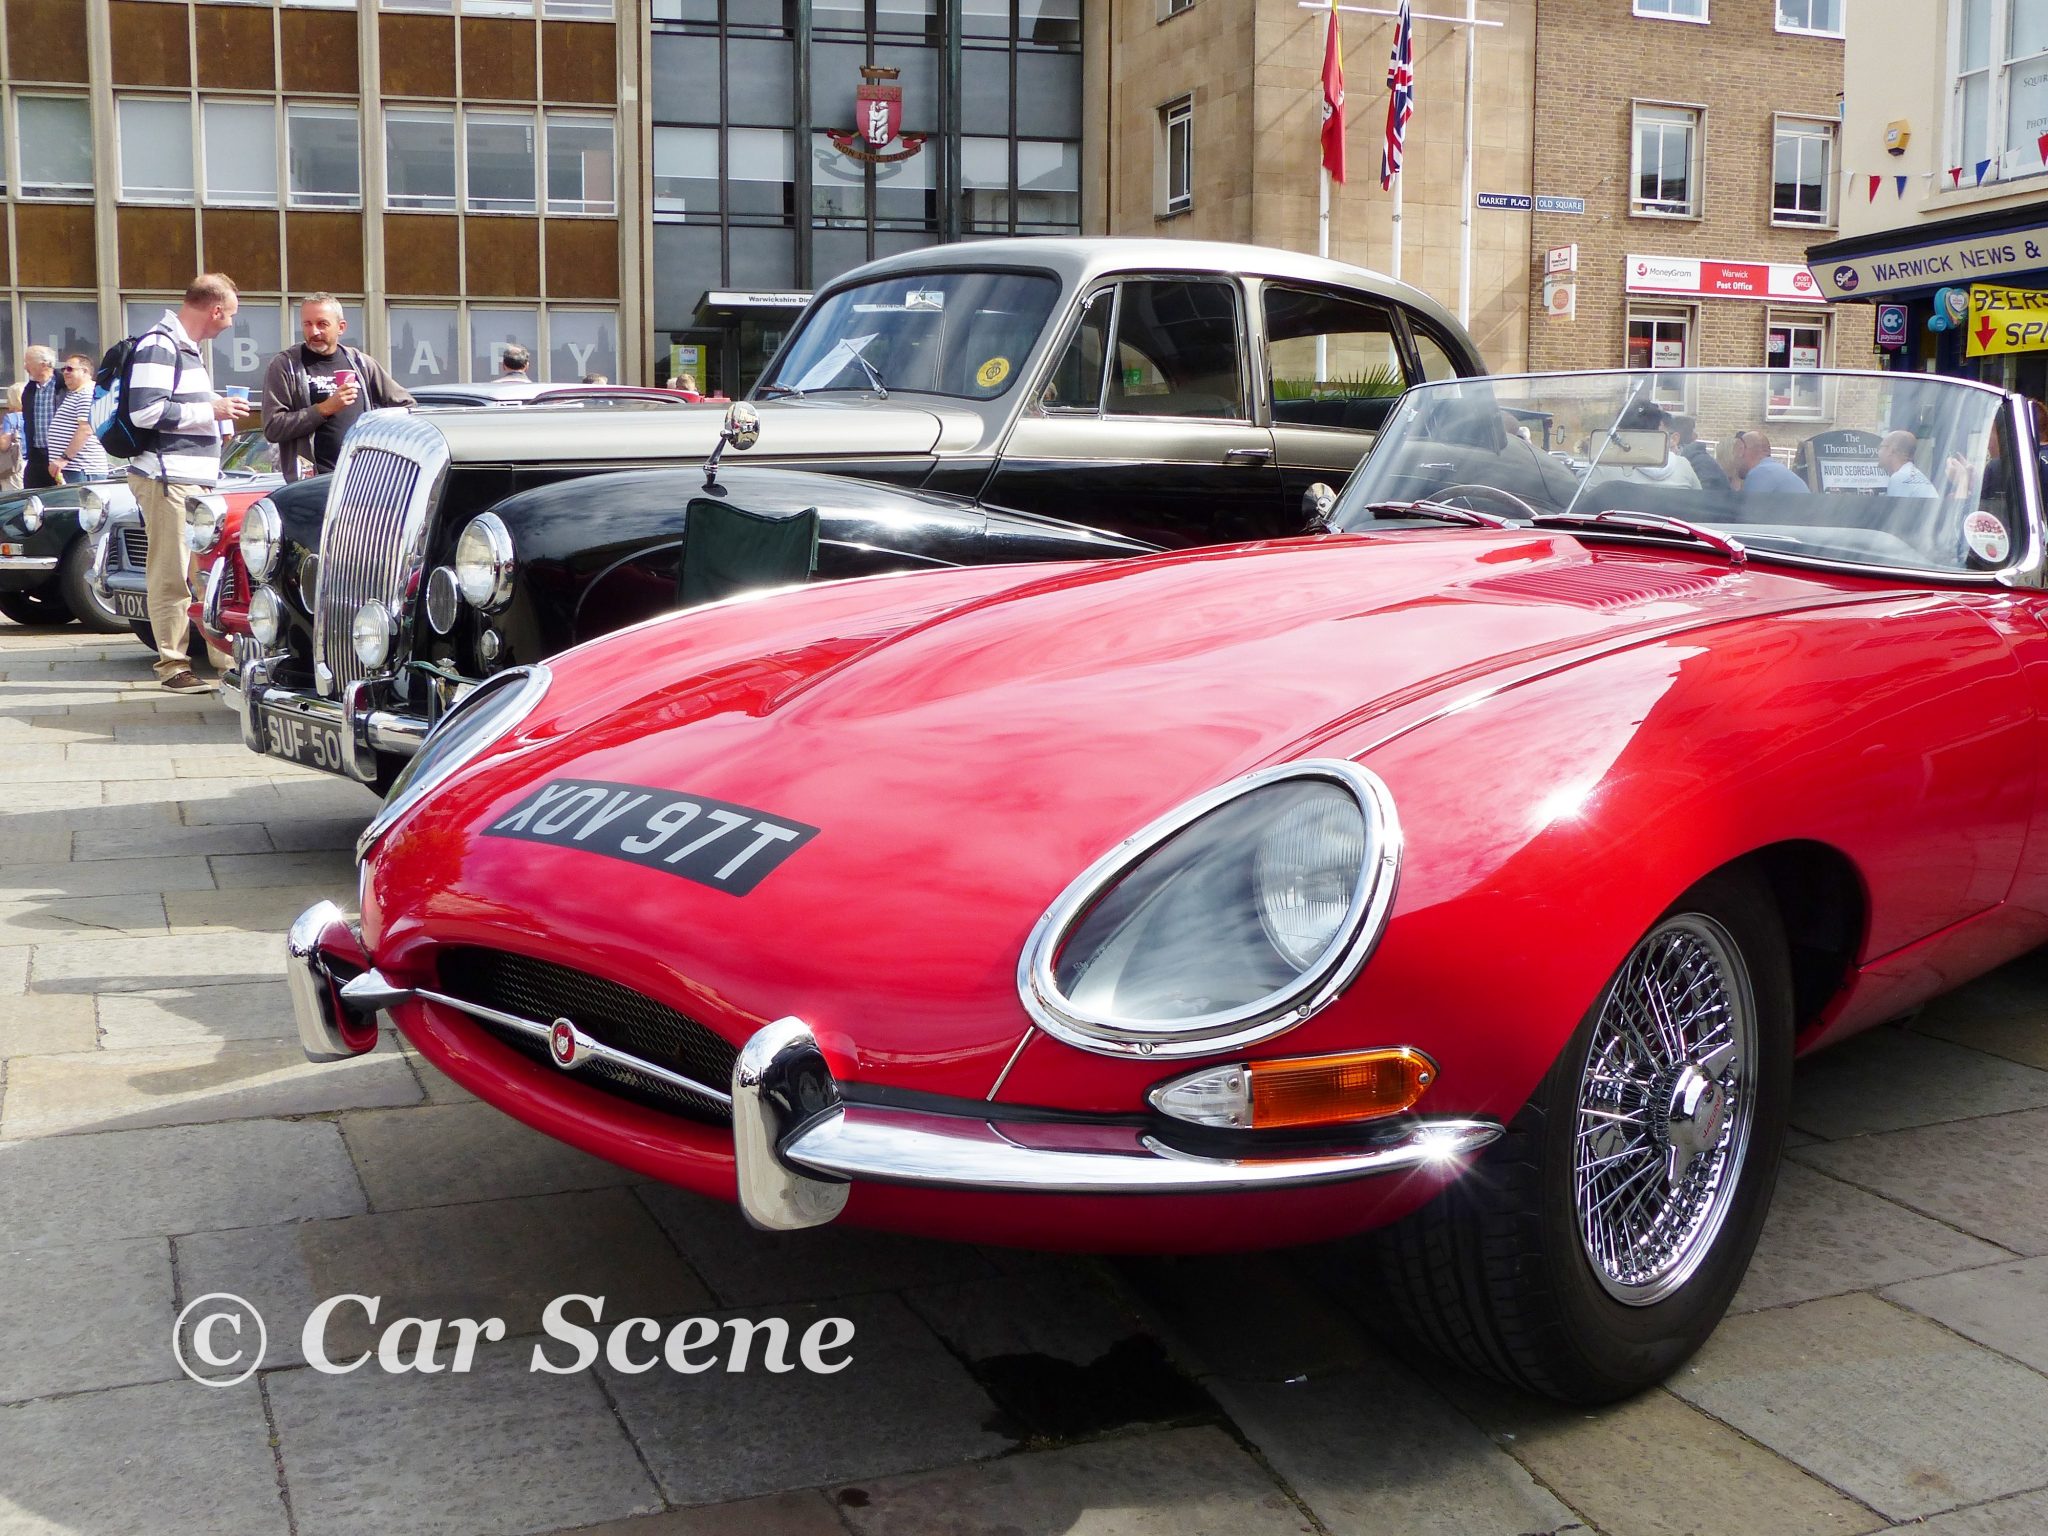 Covenry's best - An E type Jaguar and a Daimler Conquest front view